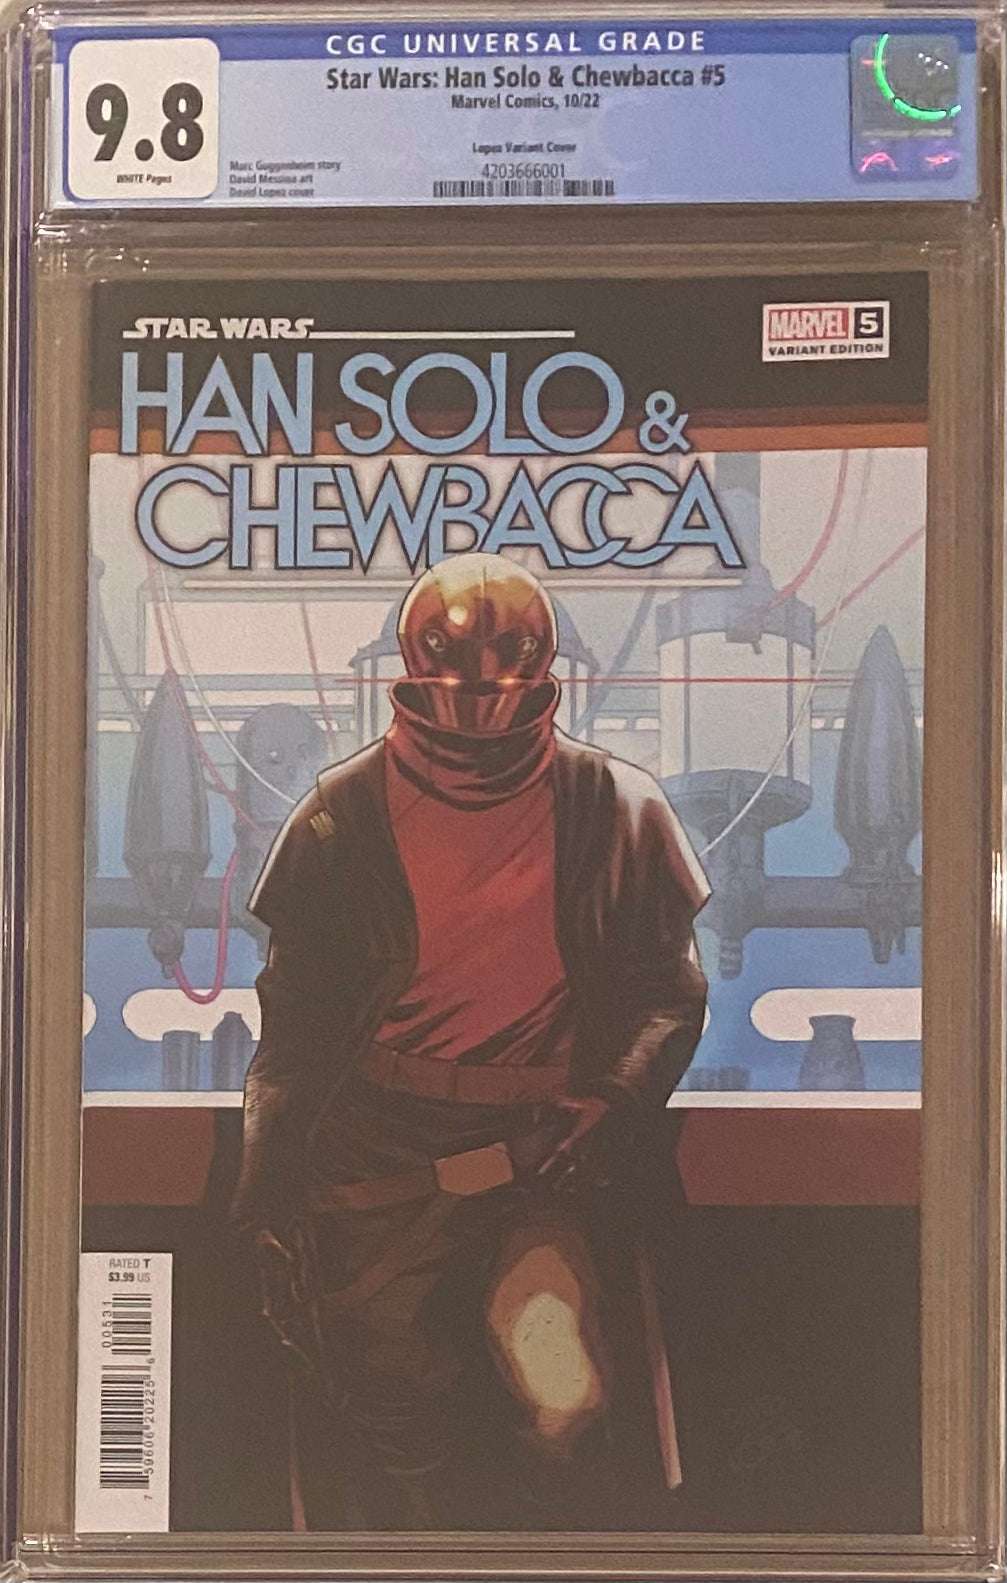 Star Wars: Han Solo & Chewbacca #5 Lopez 1:25 Retailer Incentive Variant CGC 9.8